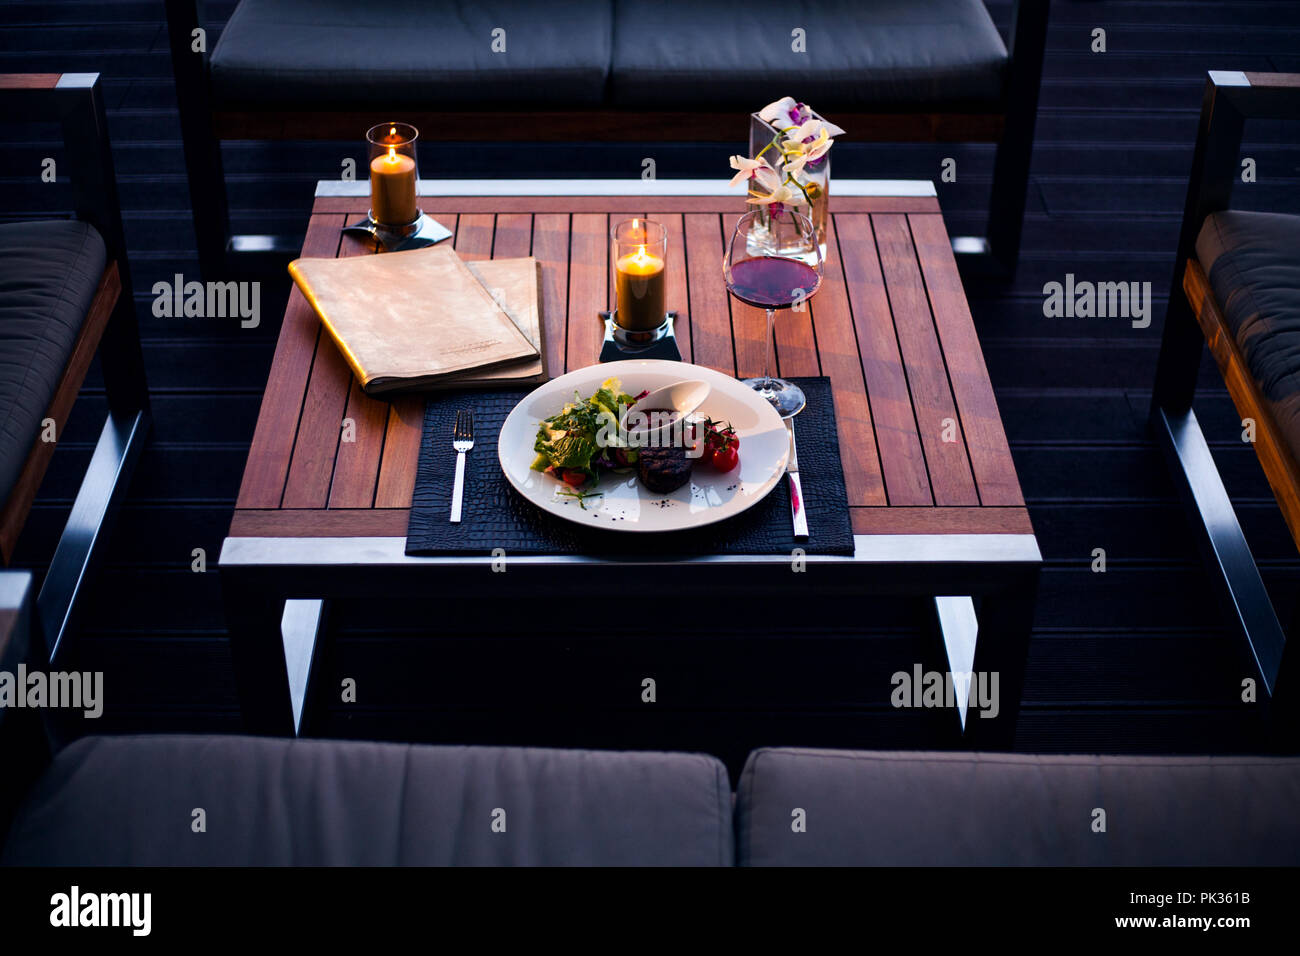 Table in restaurant served for one person and decorated with flowers and candles. Top view. Stock Photo